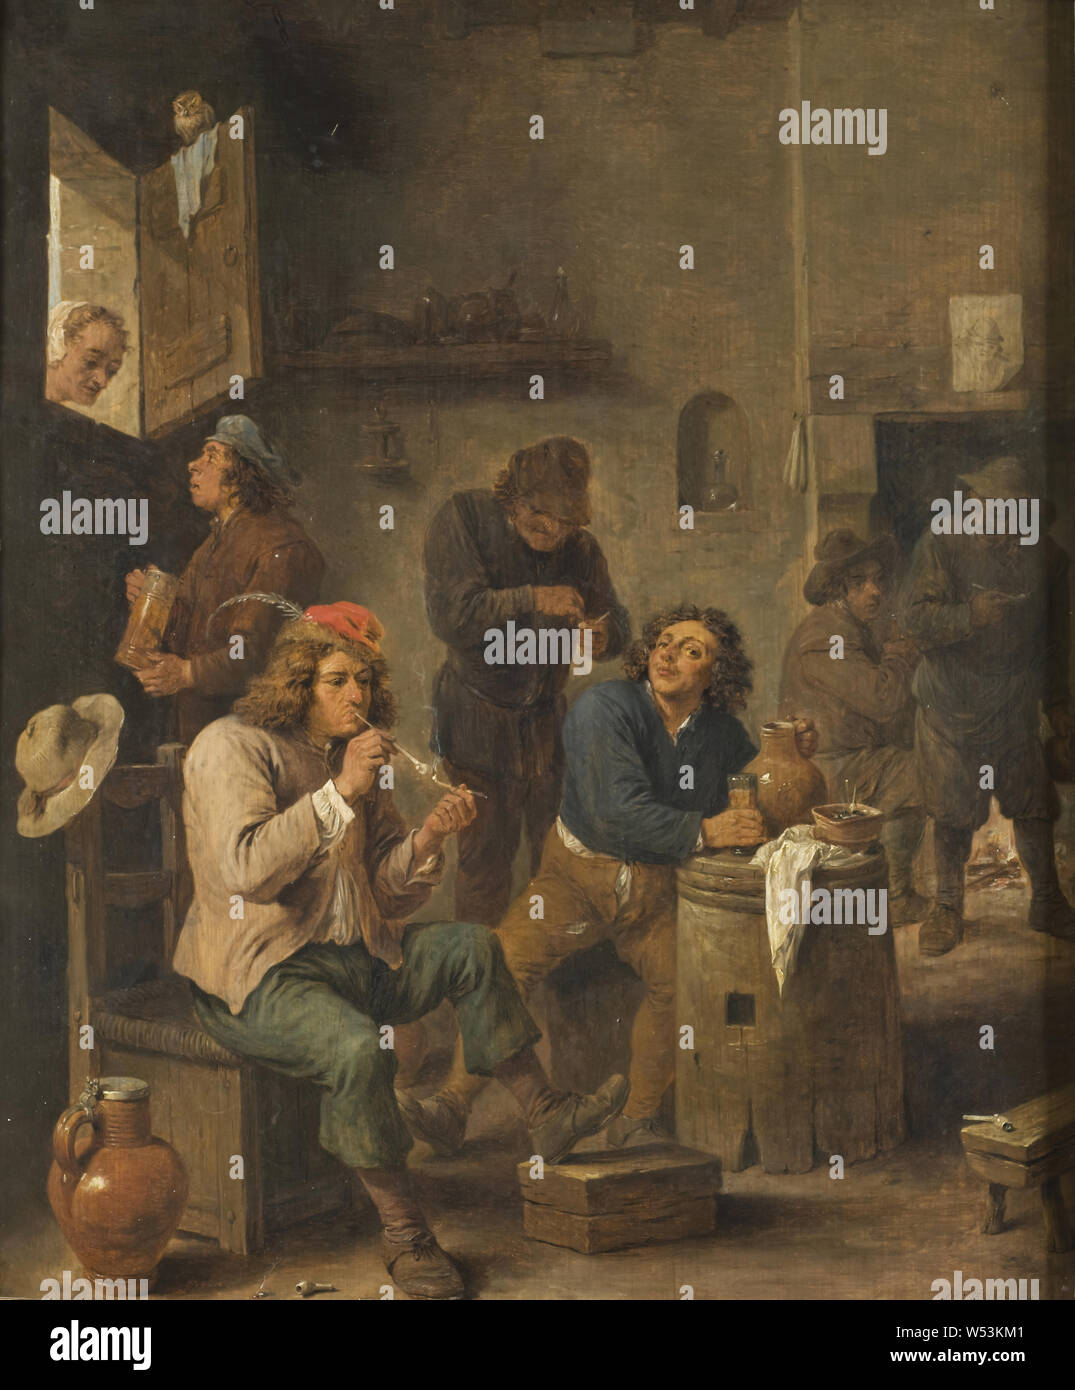 Manner of David Teniers the Younger, Interior of a Tavern, Interior from a beer cottage, 1661, Oil on wood, Height, 47 cm (18.5 inches), Width, 38 cm (14.9 inches), Signed, A. 1661 D. TENIERS, FEC, . Stock Photo